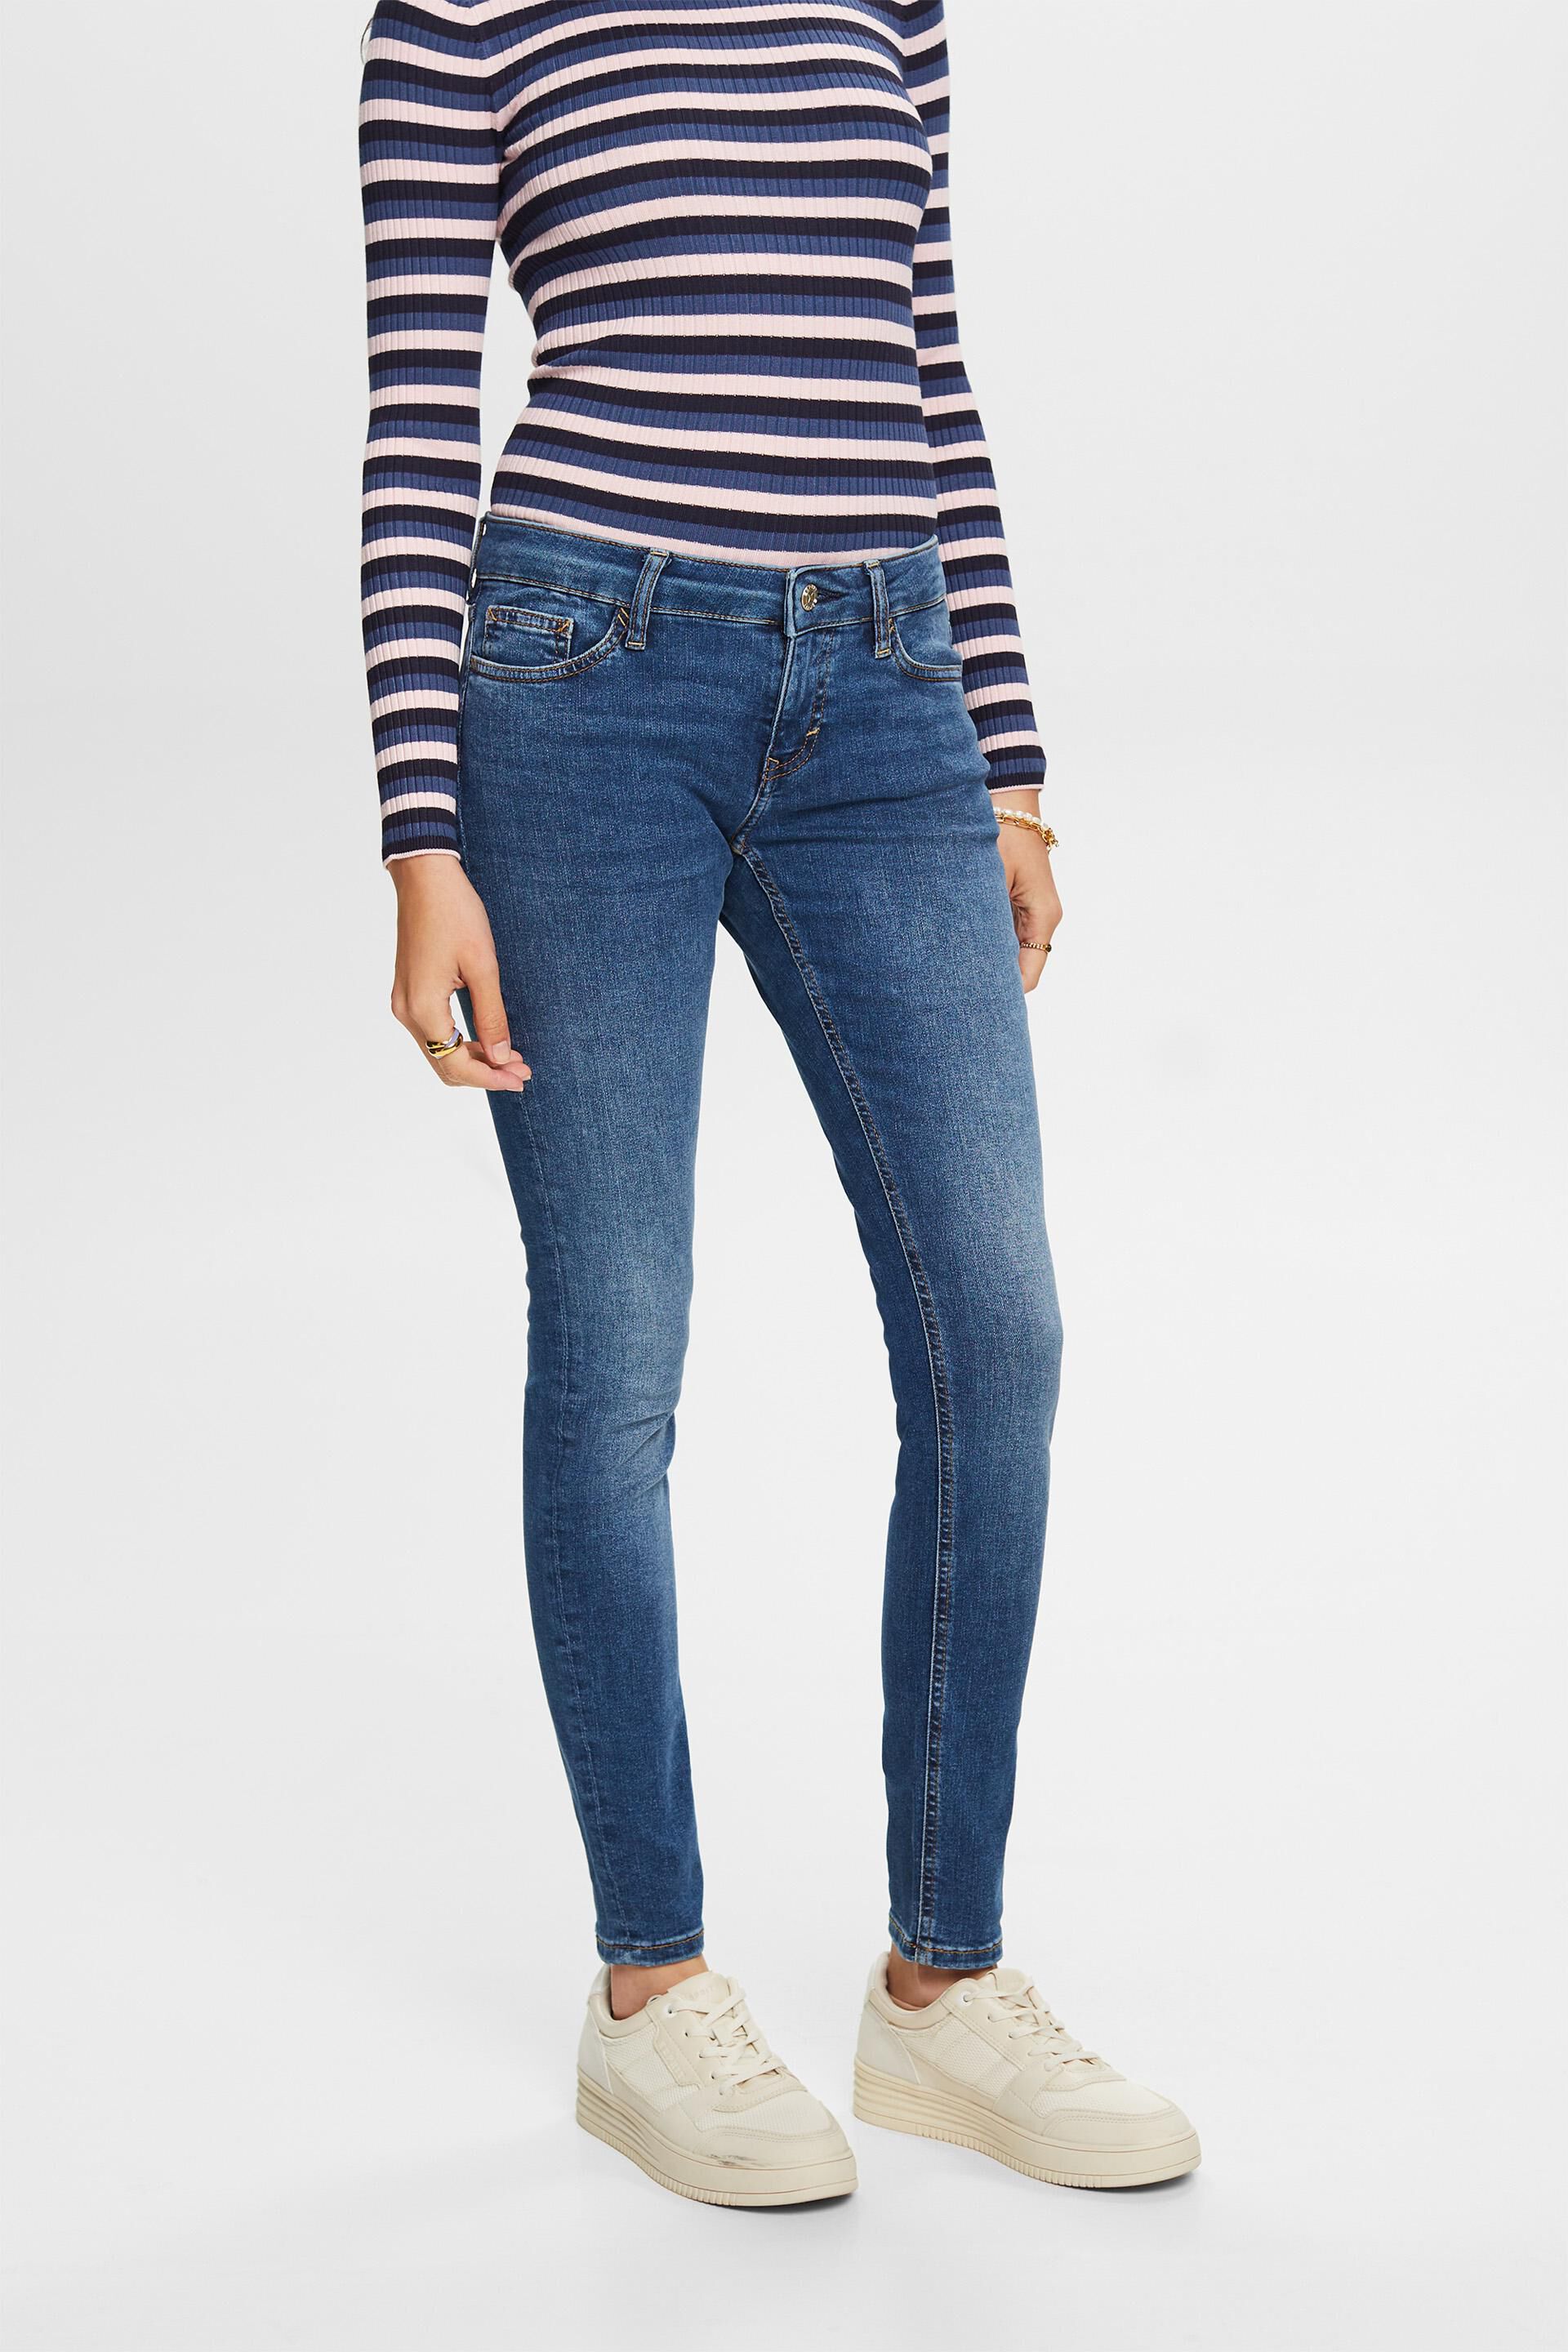 Esprit jeans Recycled: low-rise skinny